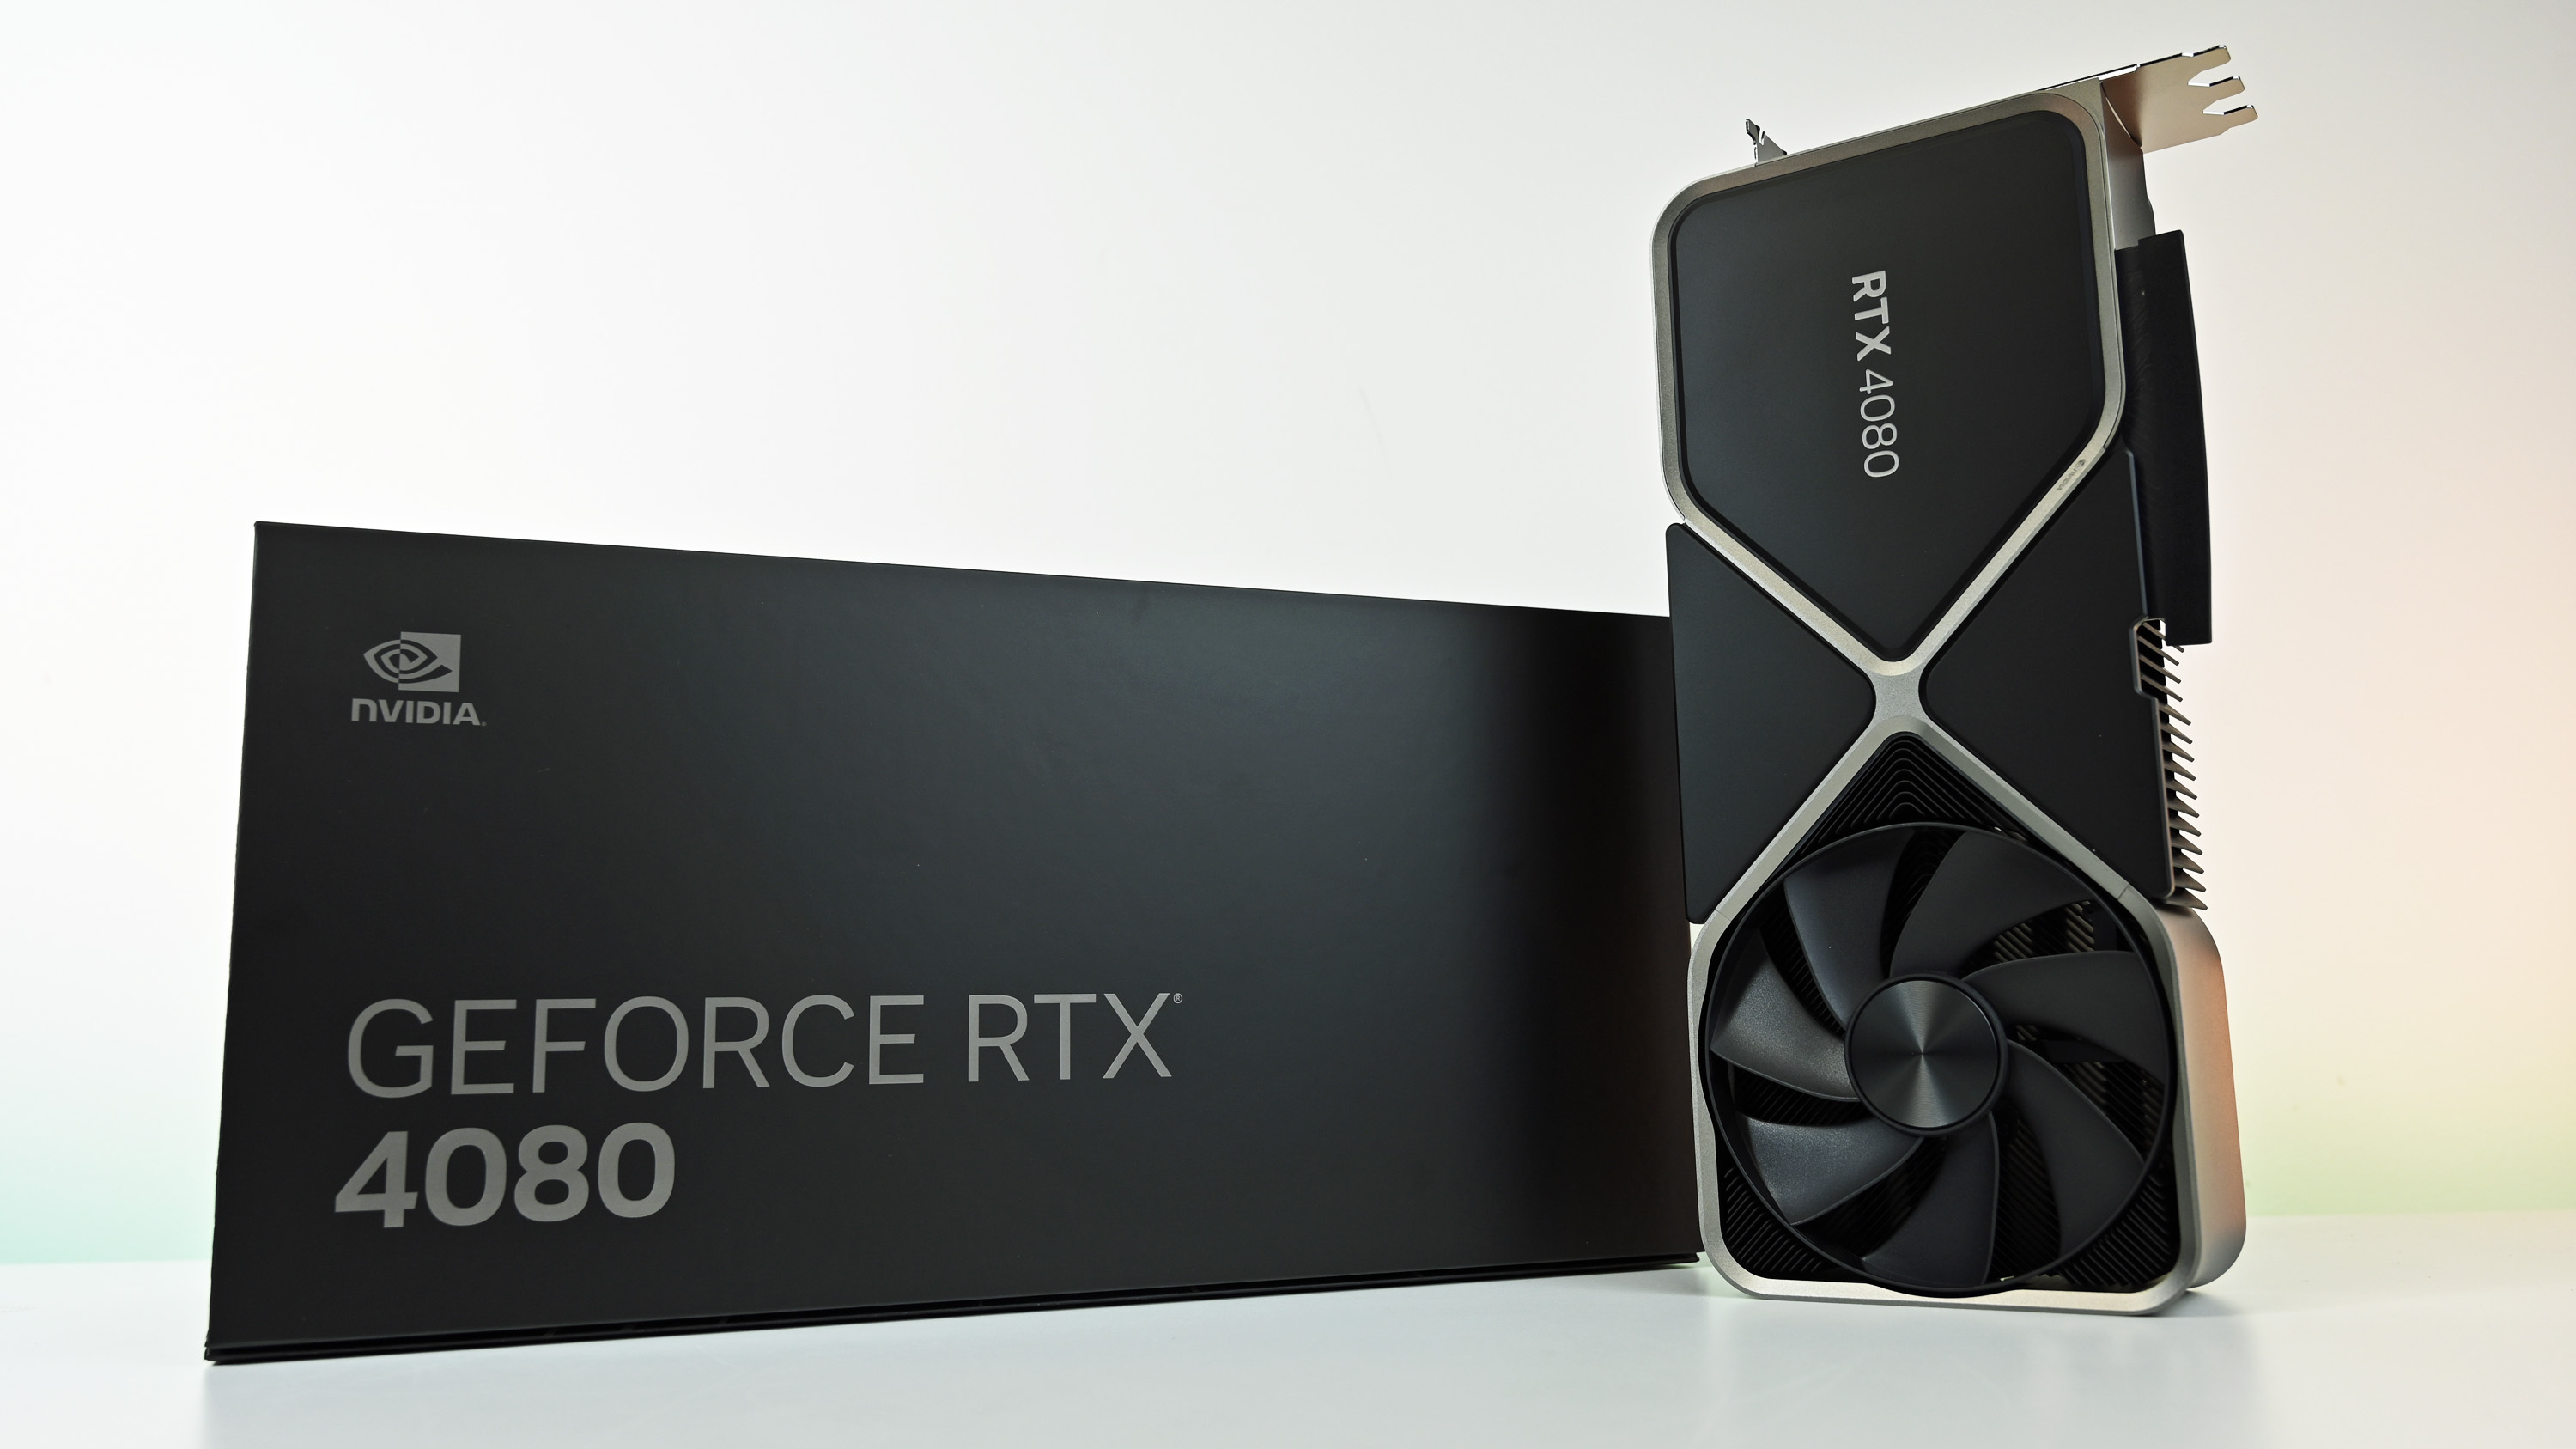 RTX 4080 Founders Edition